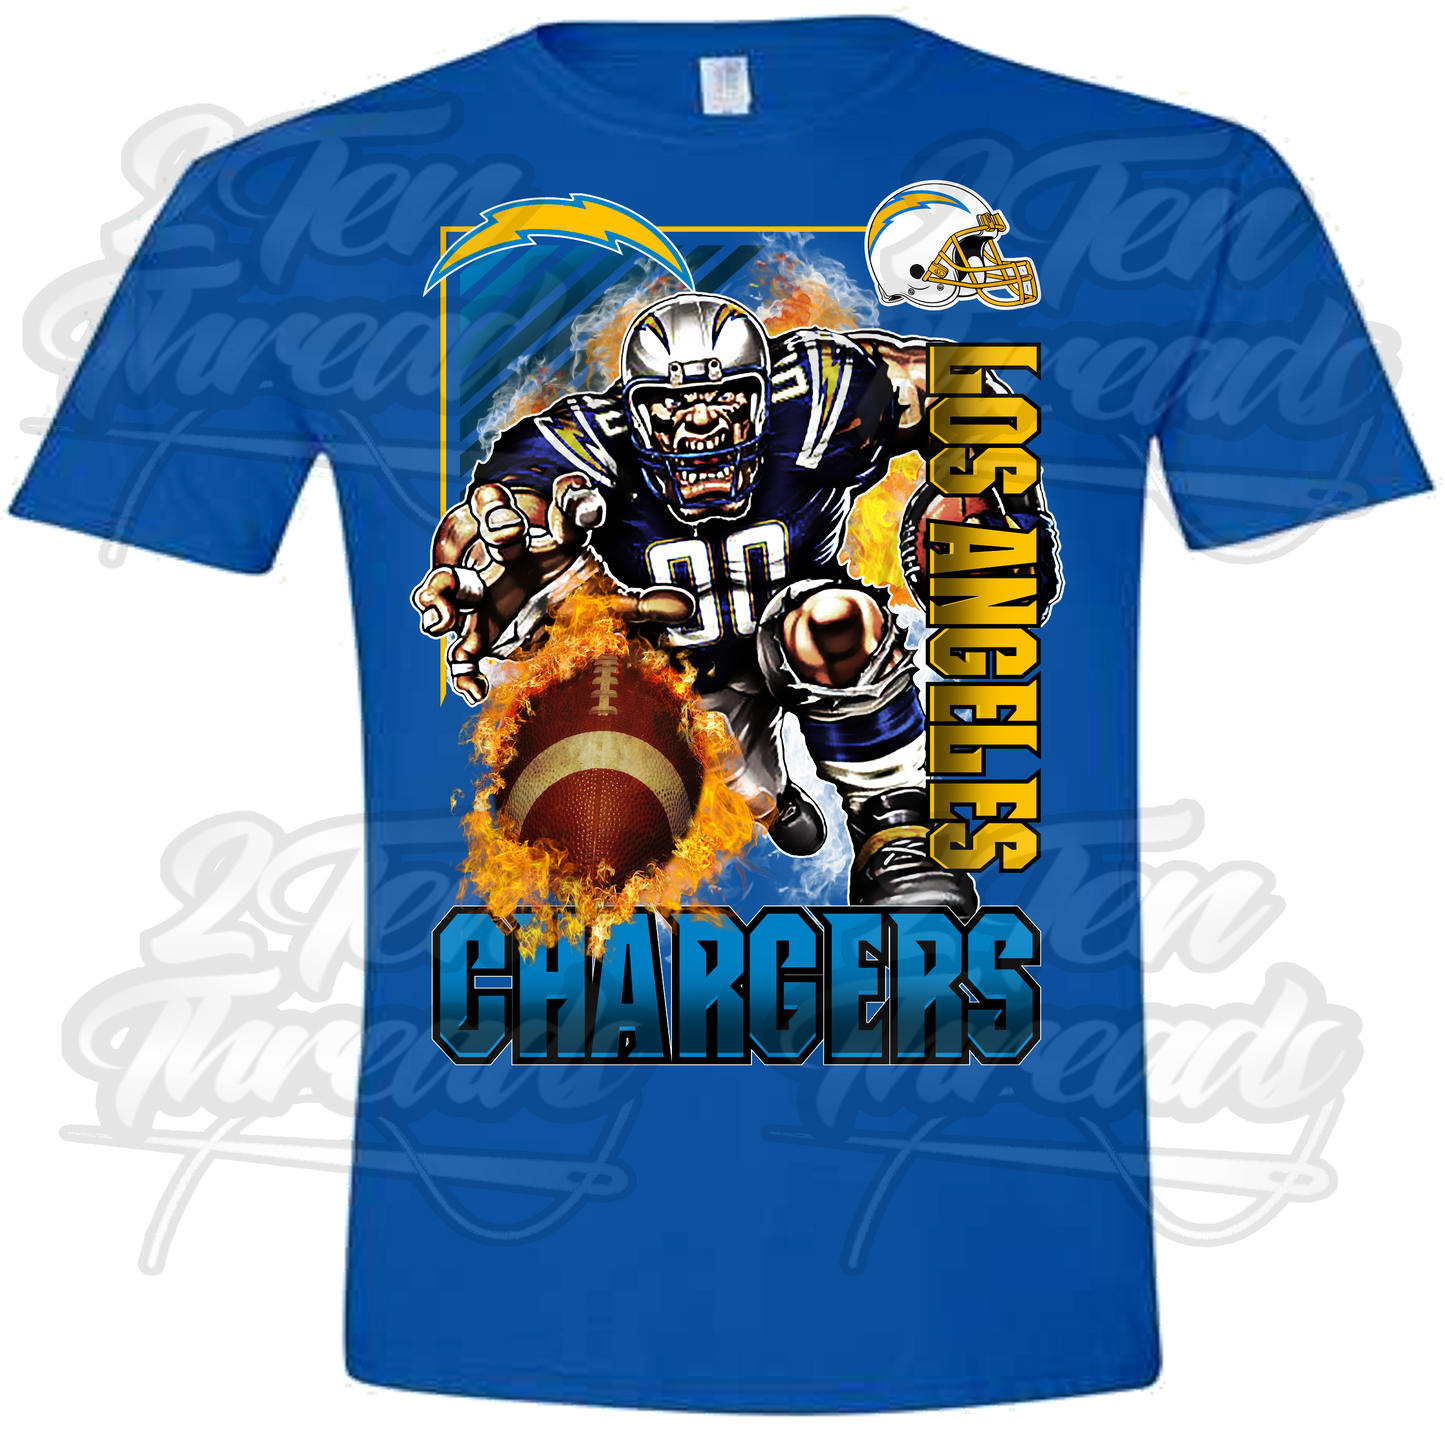 L.A. Chargers T-Shirt